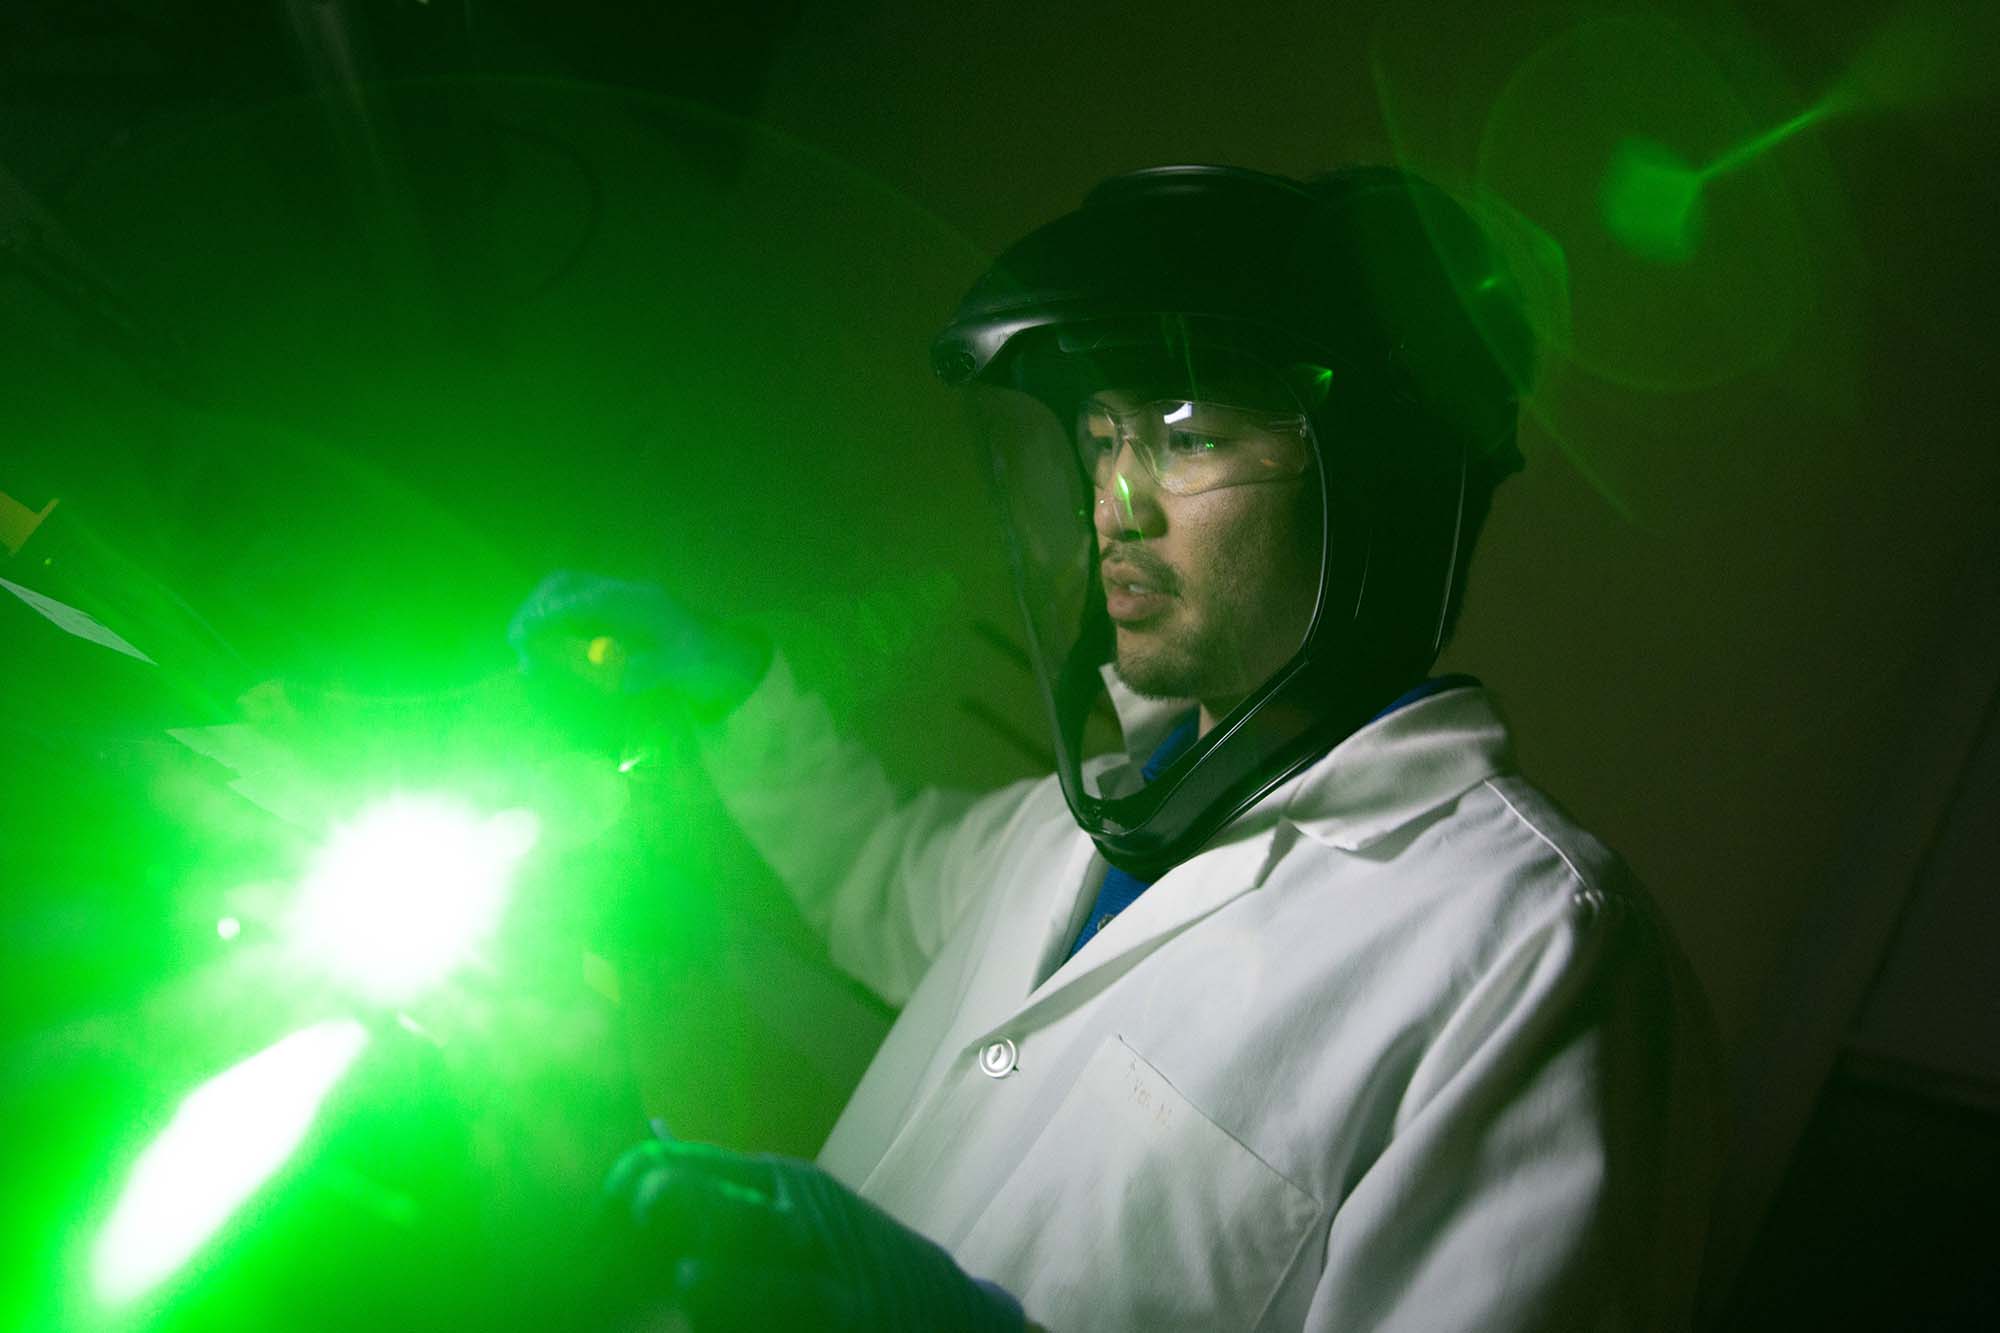 An ASU Engineering student, wearing a lab coat, measures bright green light being emitted in a dark room by germicidal optical fibers.